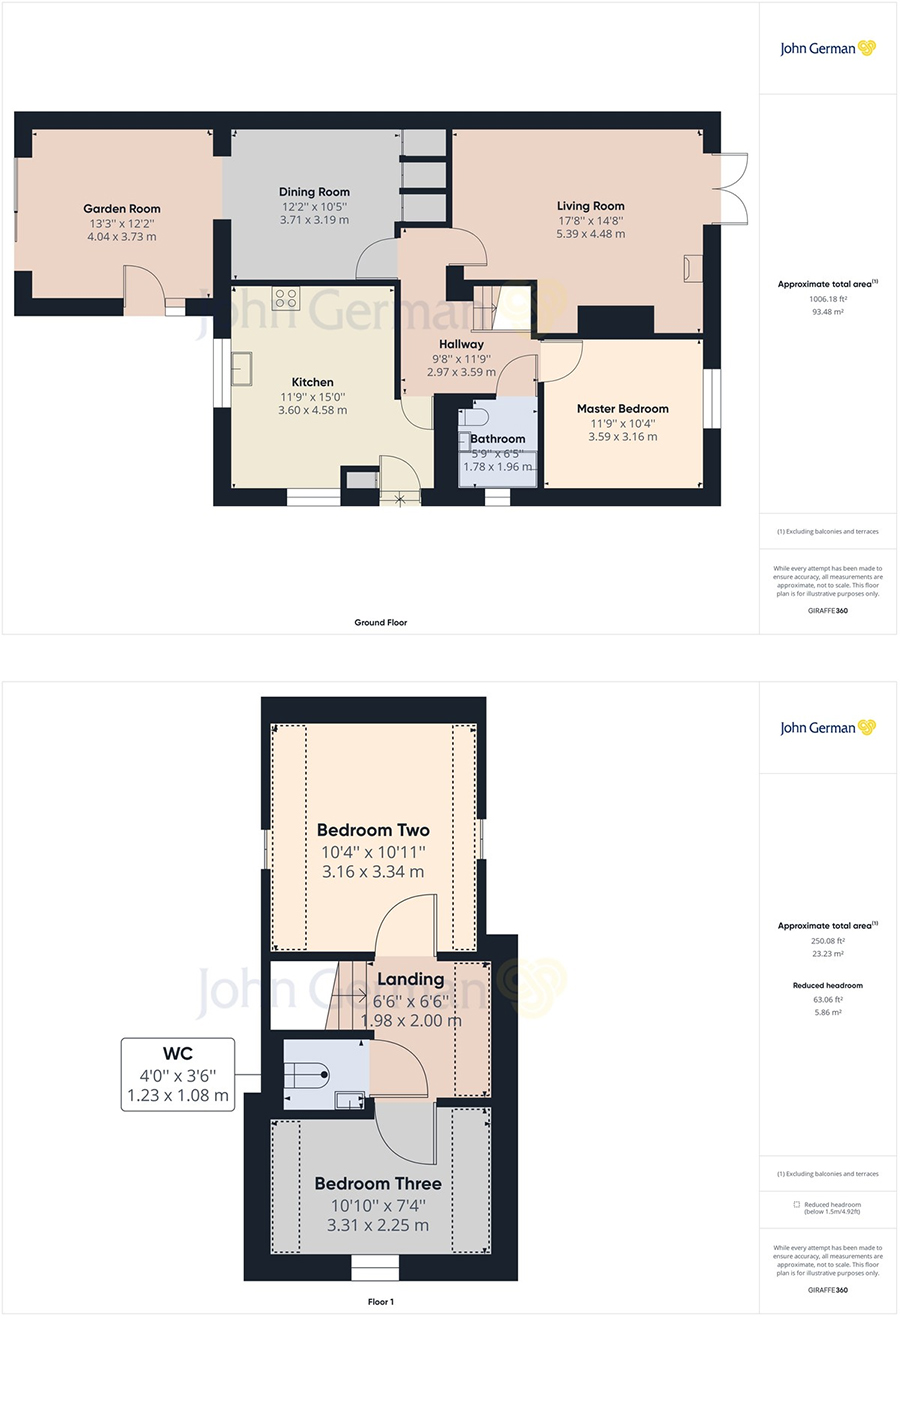 Floorplan of Converted barn for sale near Uttoxeter, Staffordshire